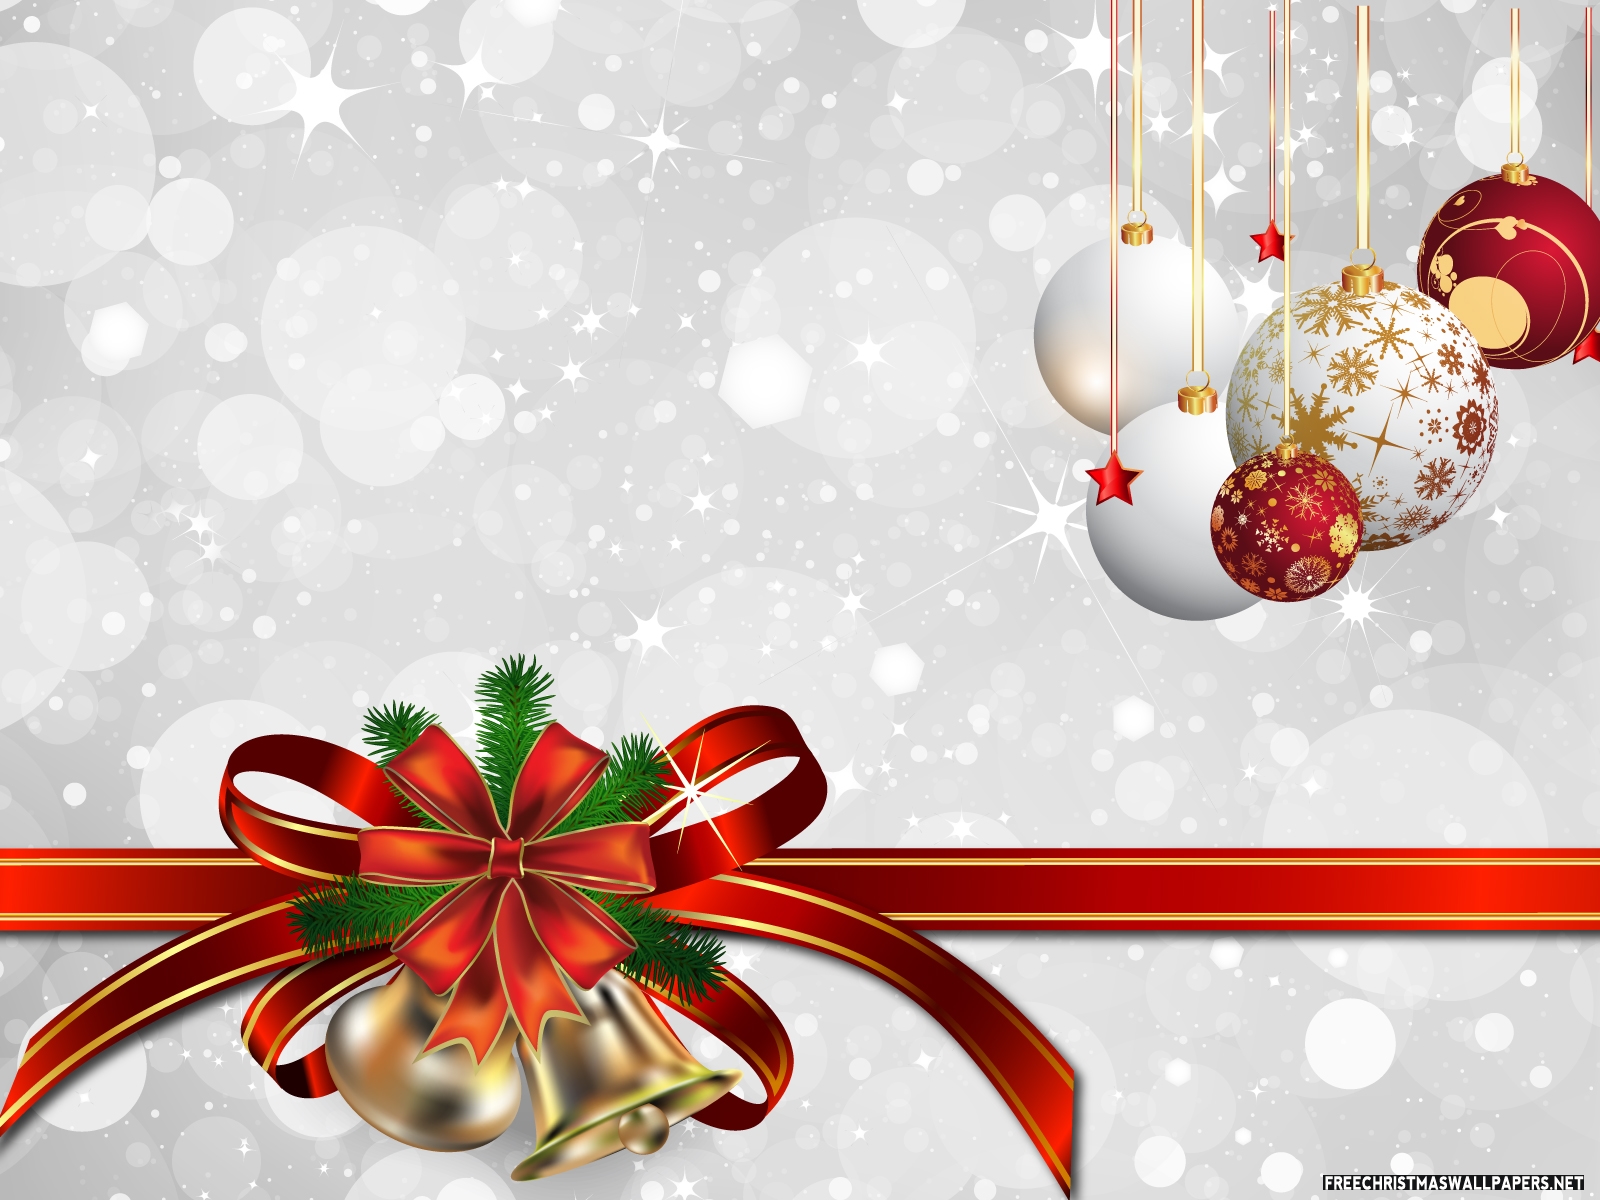 New Collection Of HD Christmas Wallpaper Psdre